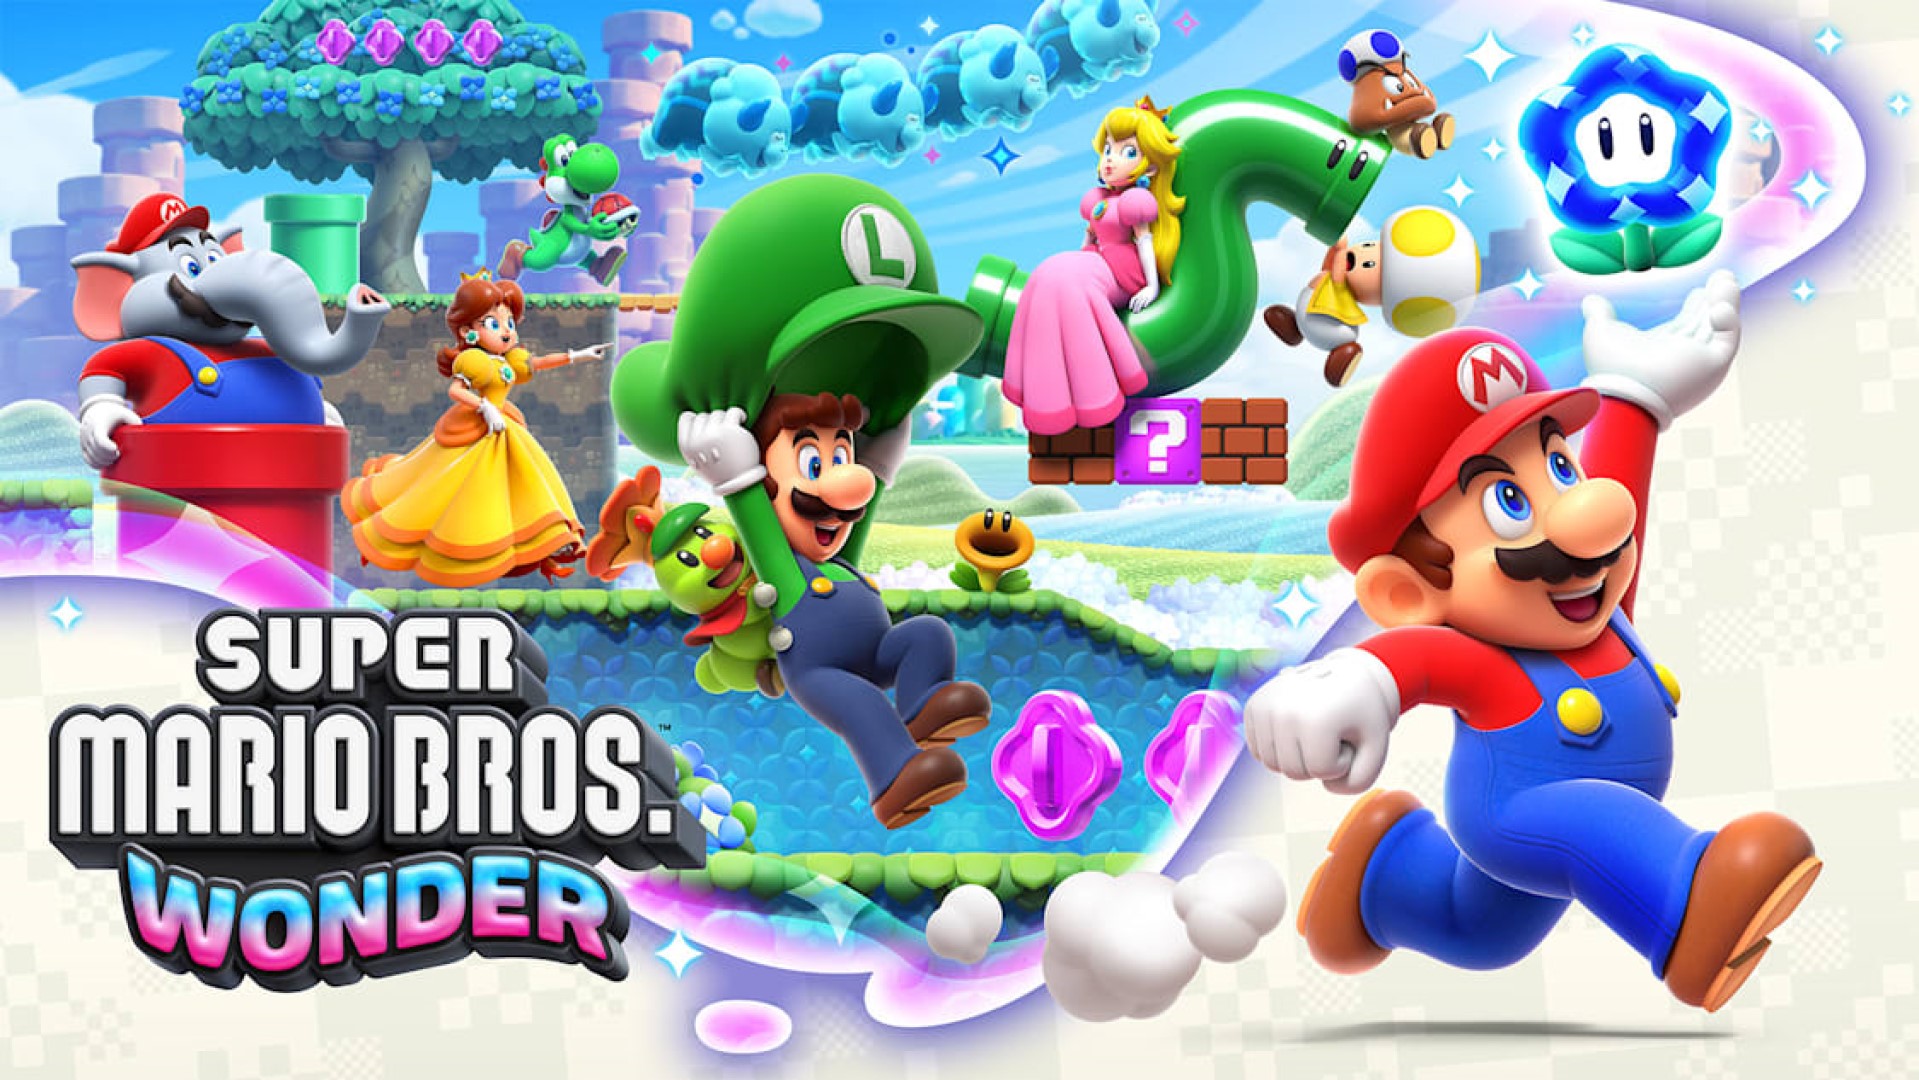 Super Mario Bros. Wonder Gameplay Showcases New Courses, Power-ups, Enemies and More